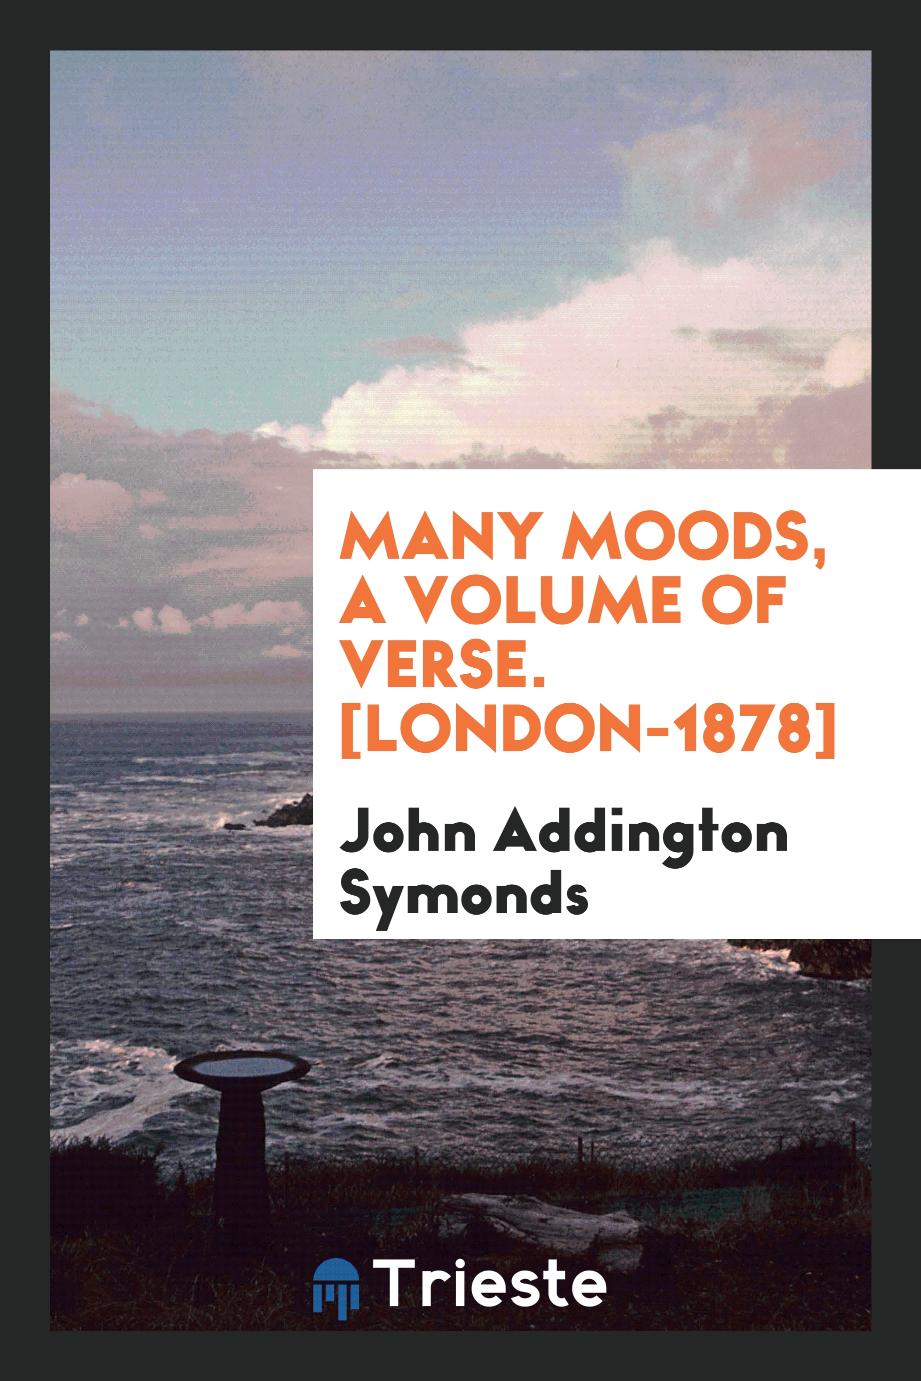 Many Moods, a Volume of Verse. [London-1878]